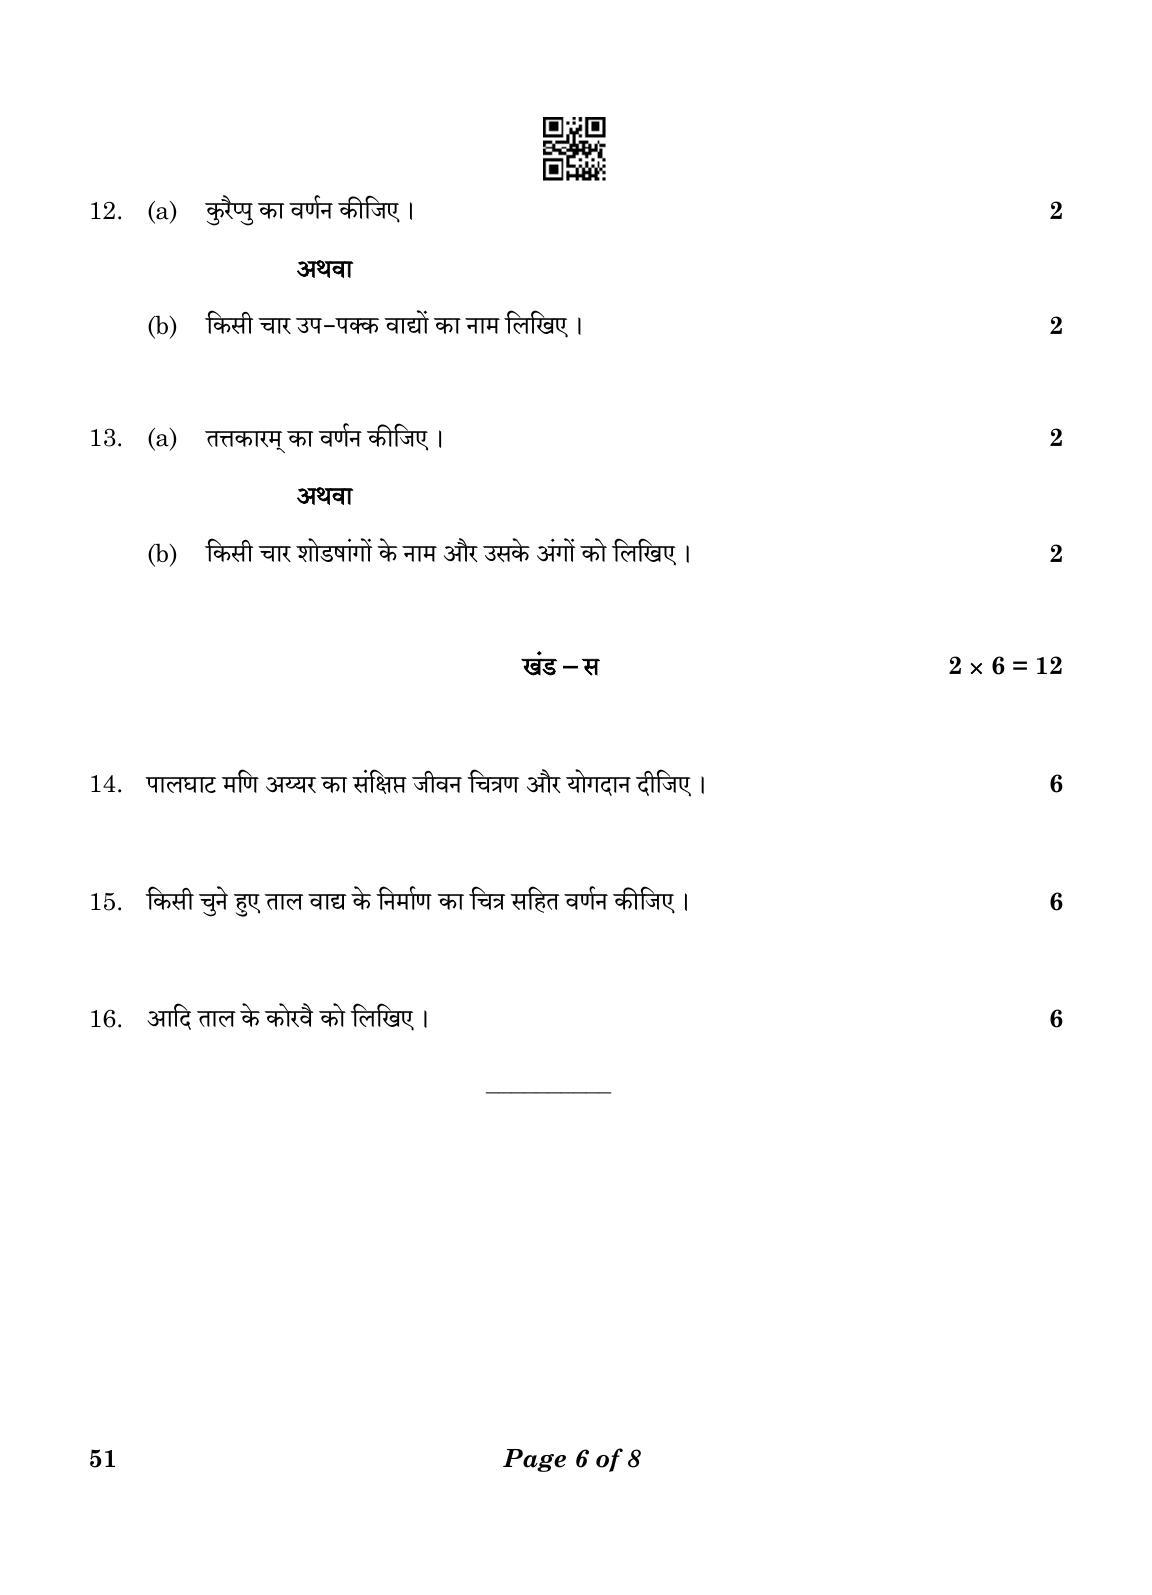 CBSE Class 10 51 CARNATIC MUSIC (Percussion Instruments) 2023 Question Paper - Page 6